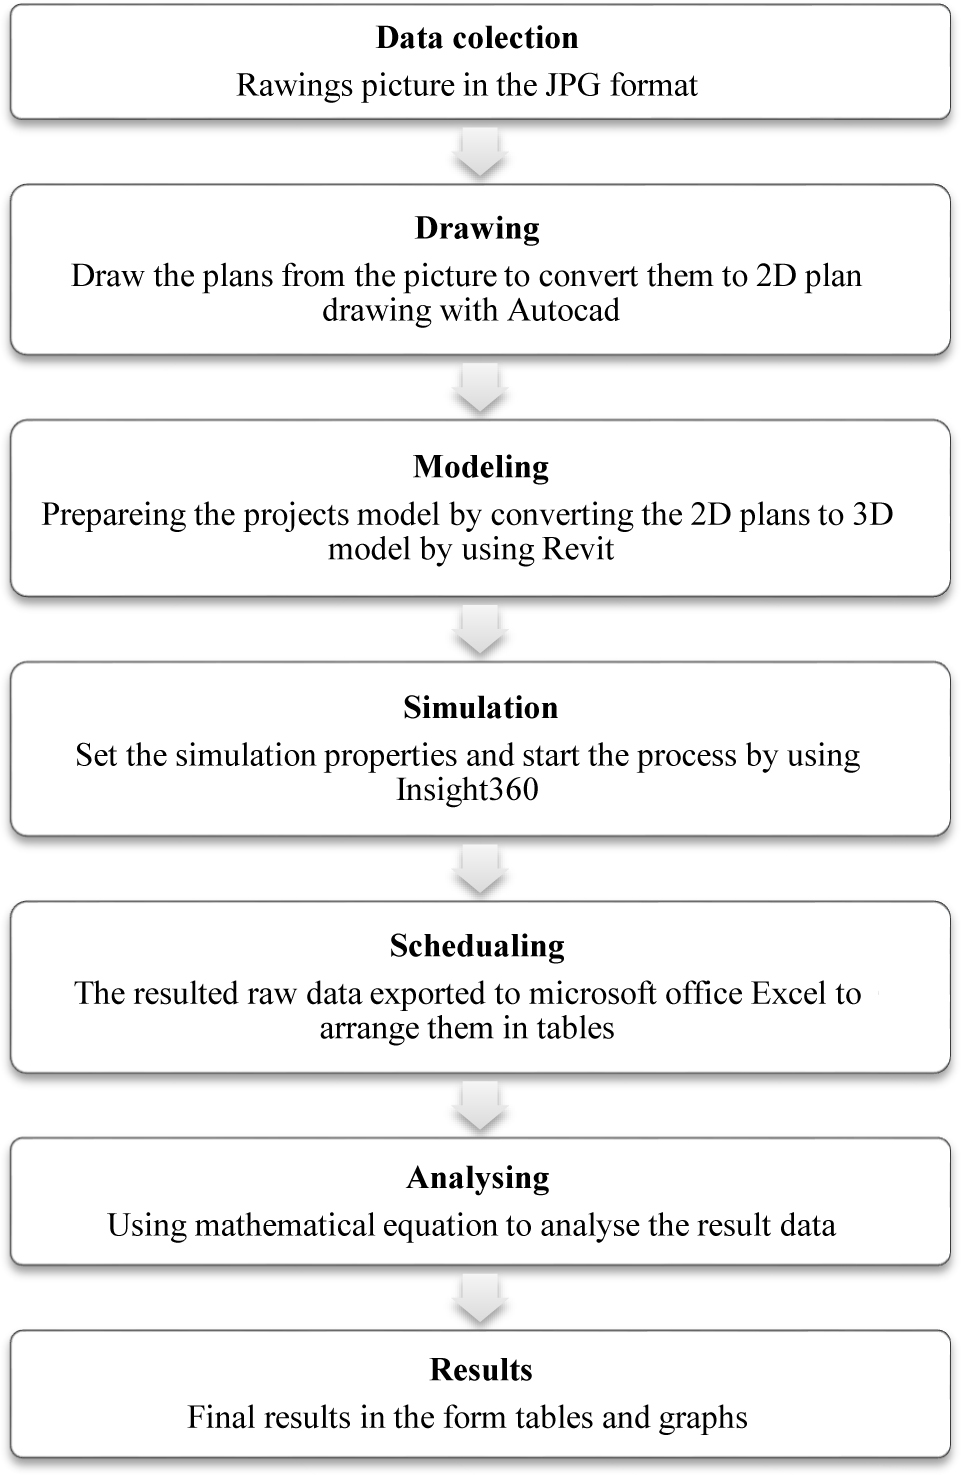 Methodology stages.